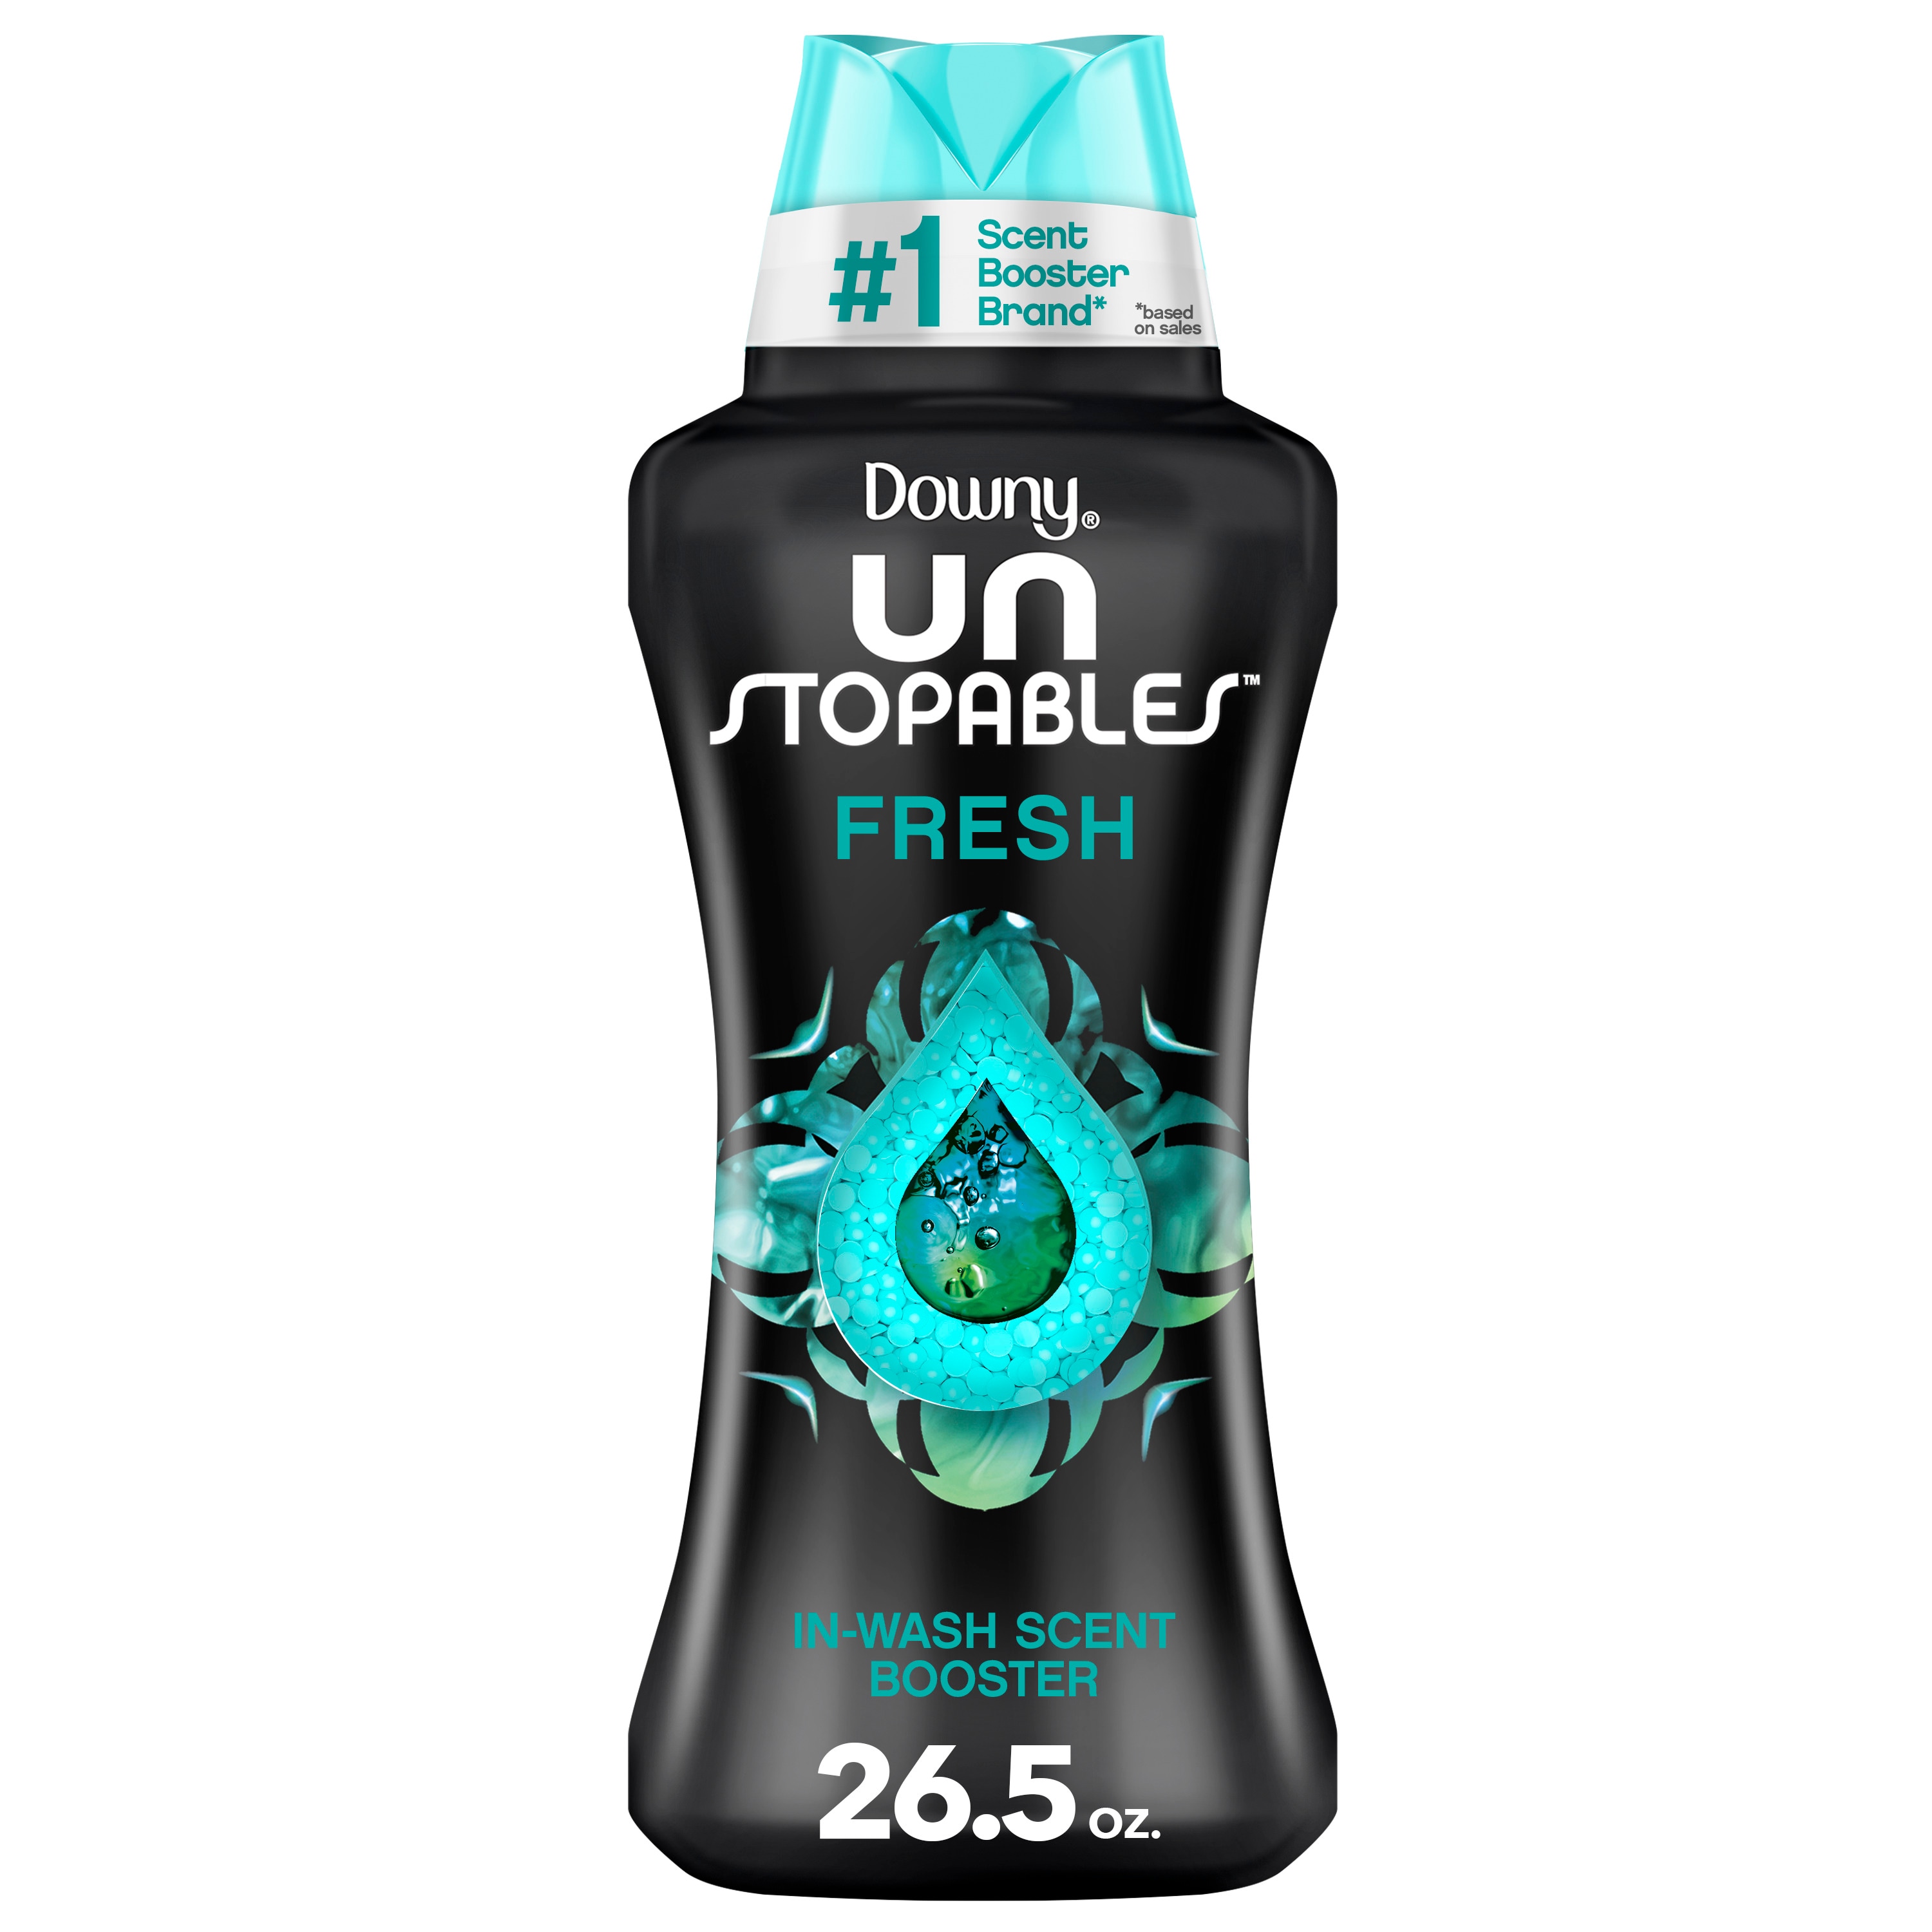 Downy Fresh Protect In-Wash Scent Booster Beads, April Fresh - 14.8 oz bottle